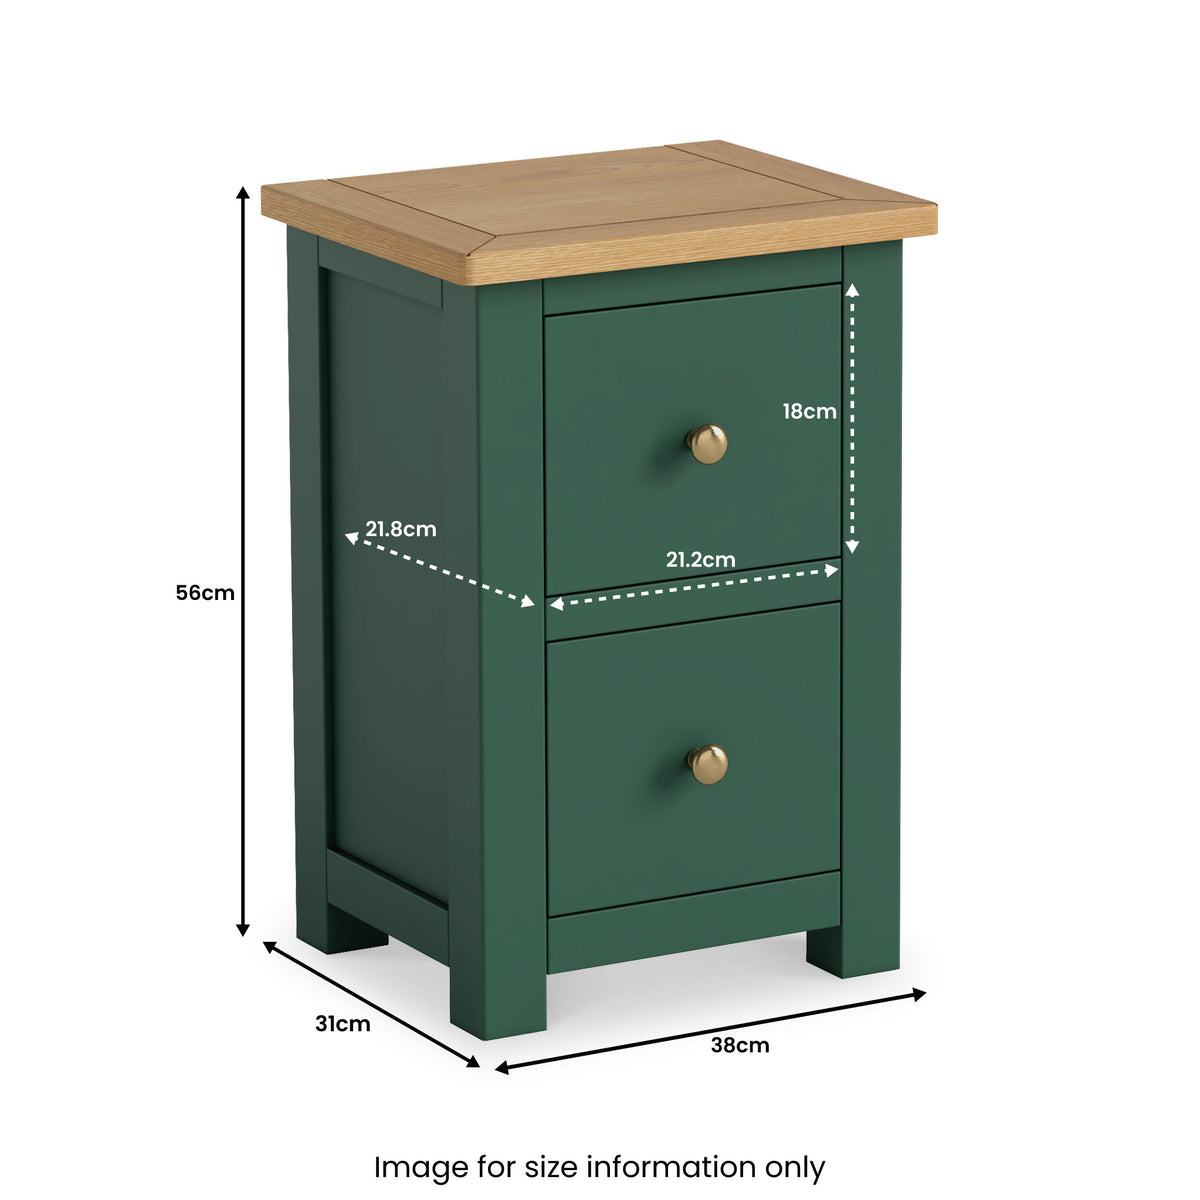 Duchy Puck Green 2 Drawer Nightstand with Oak Top